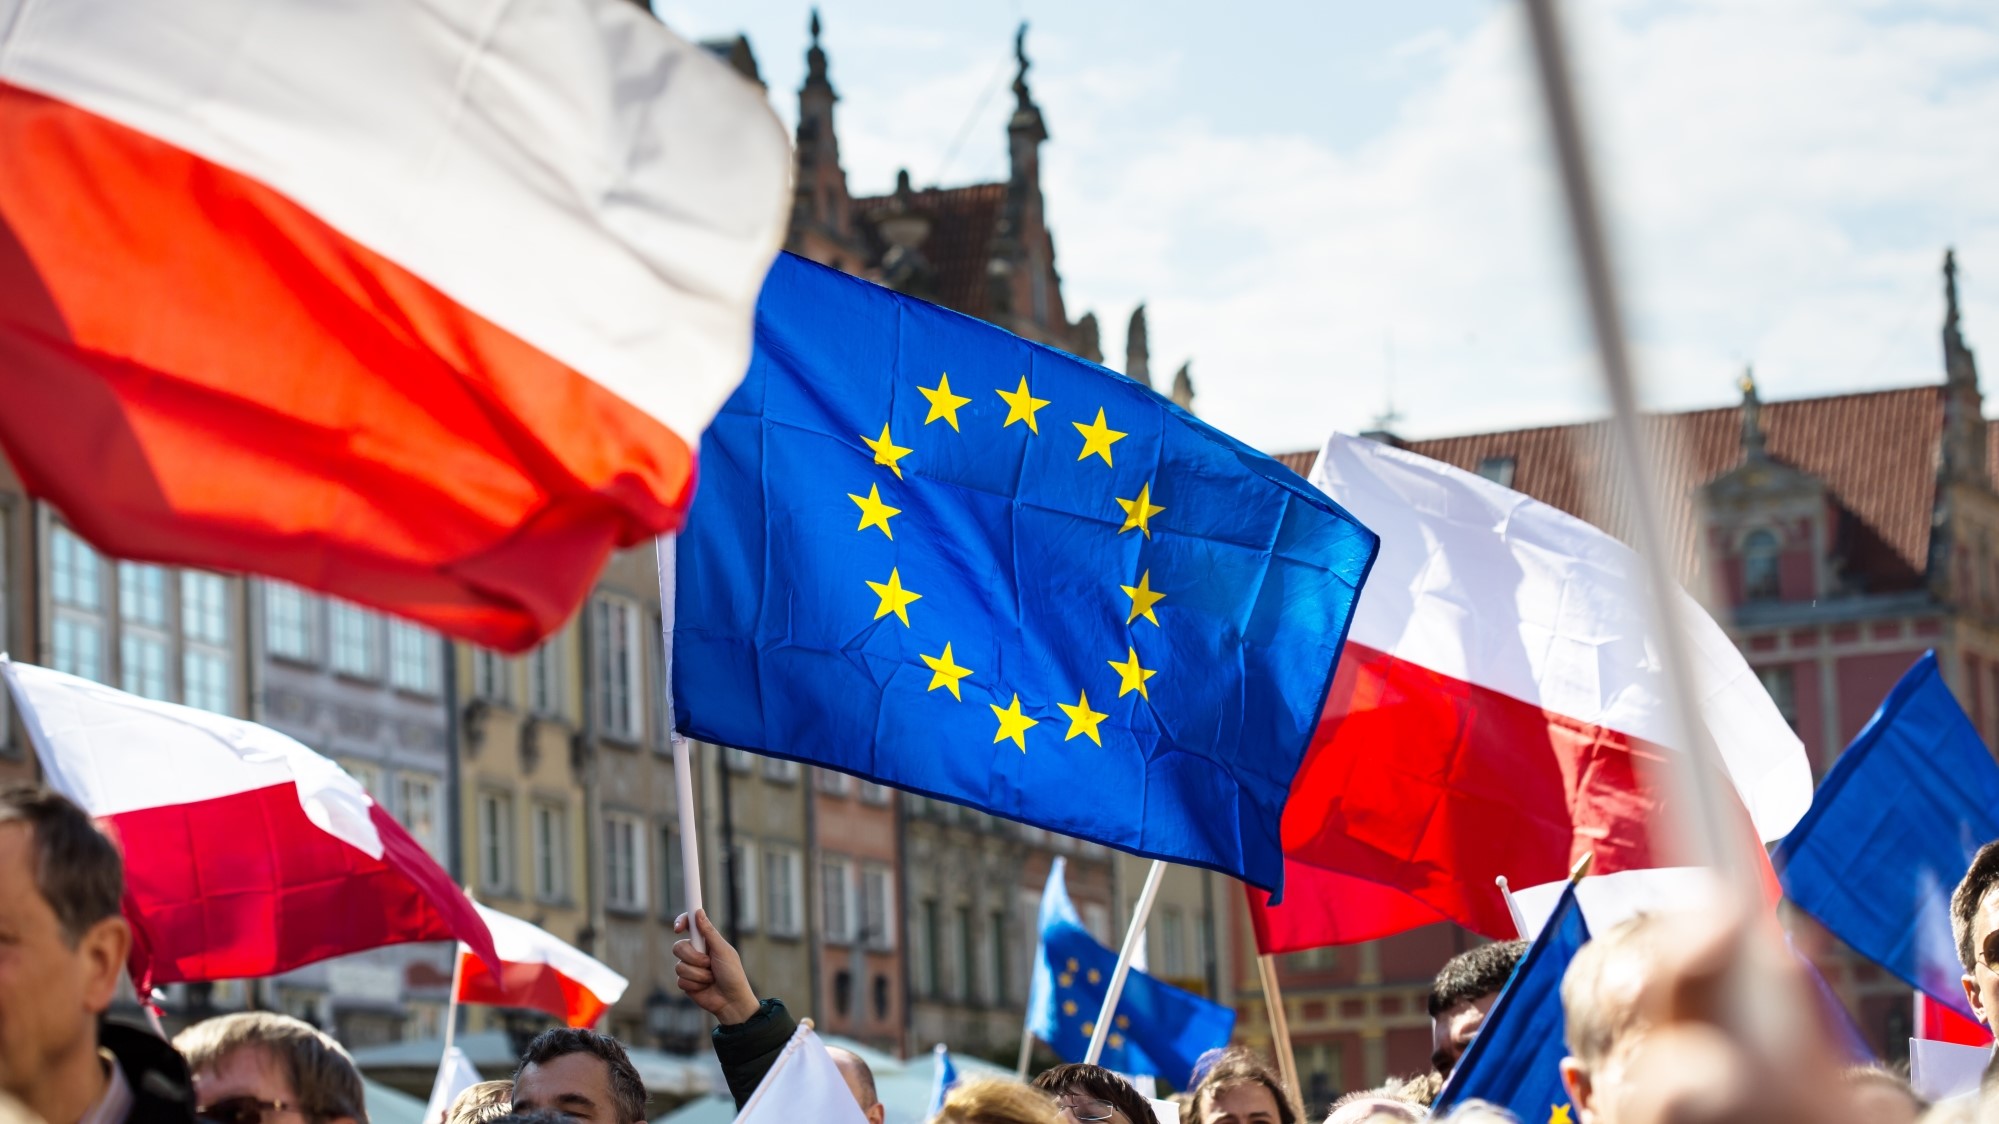 Flags of Poland and the European Union